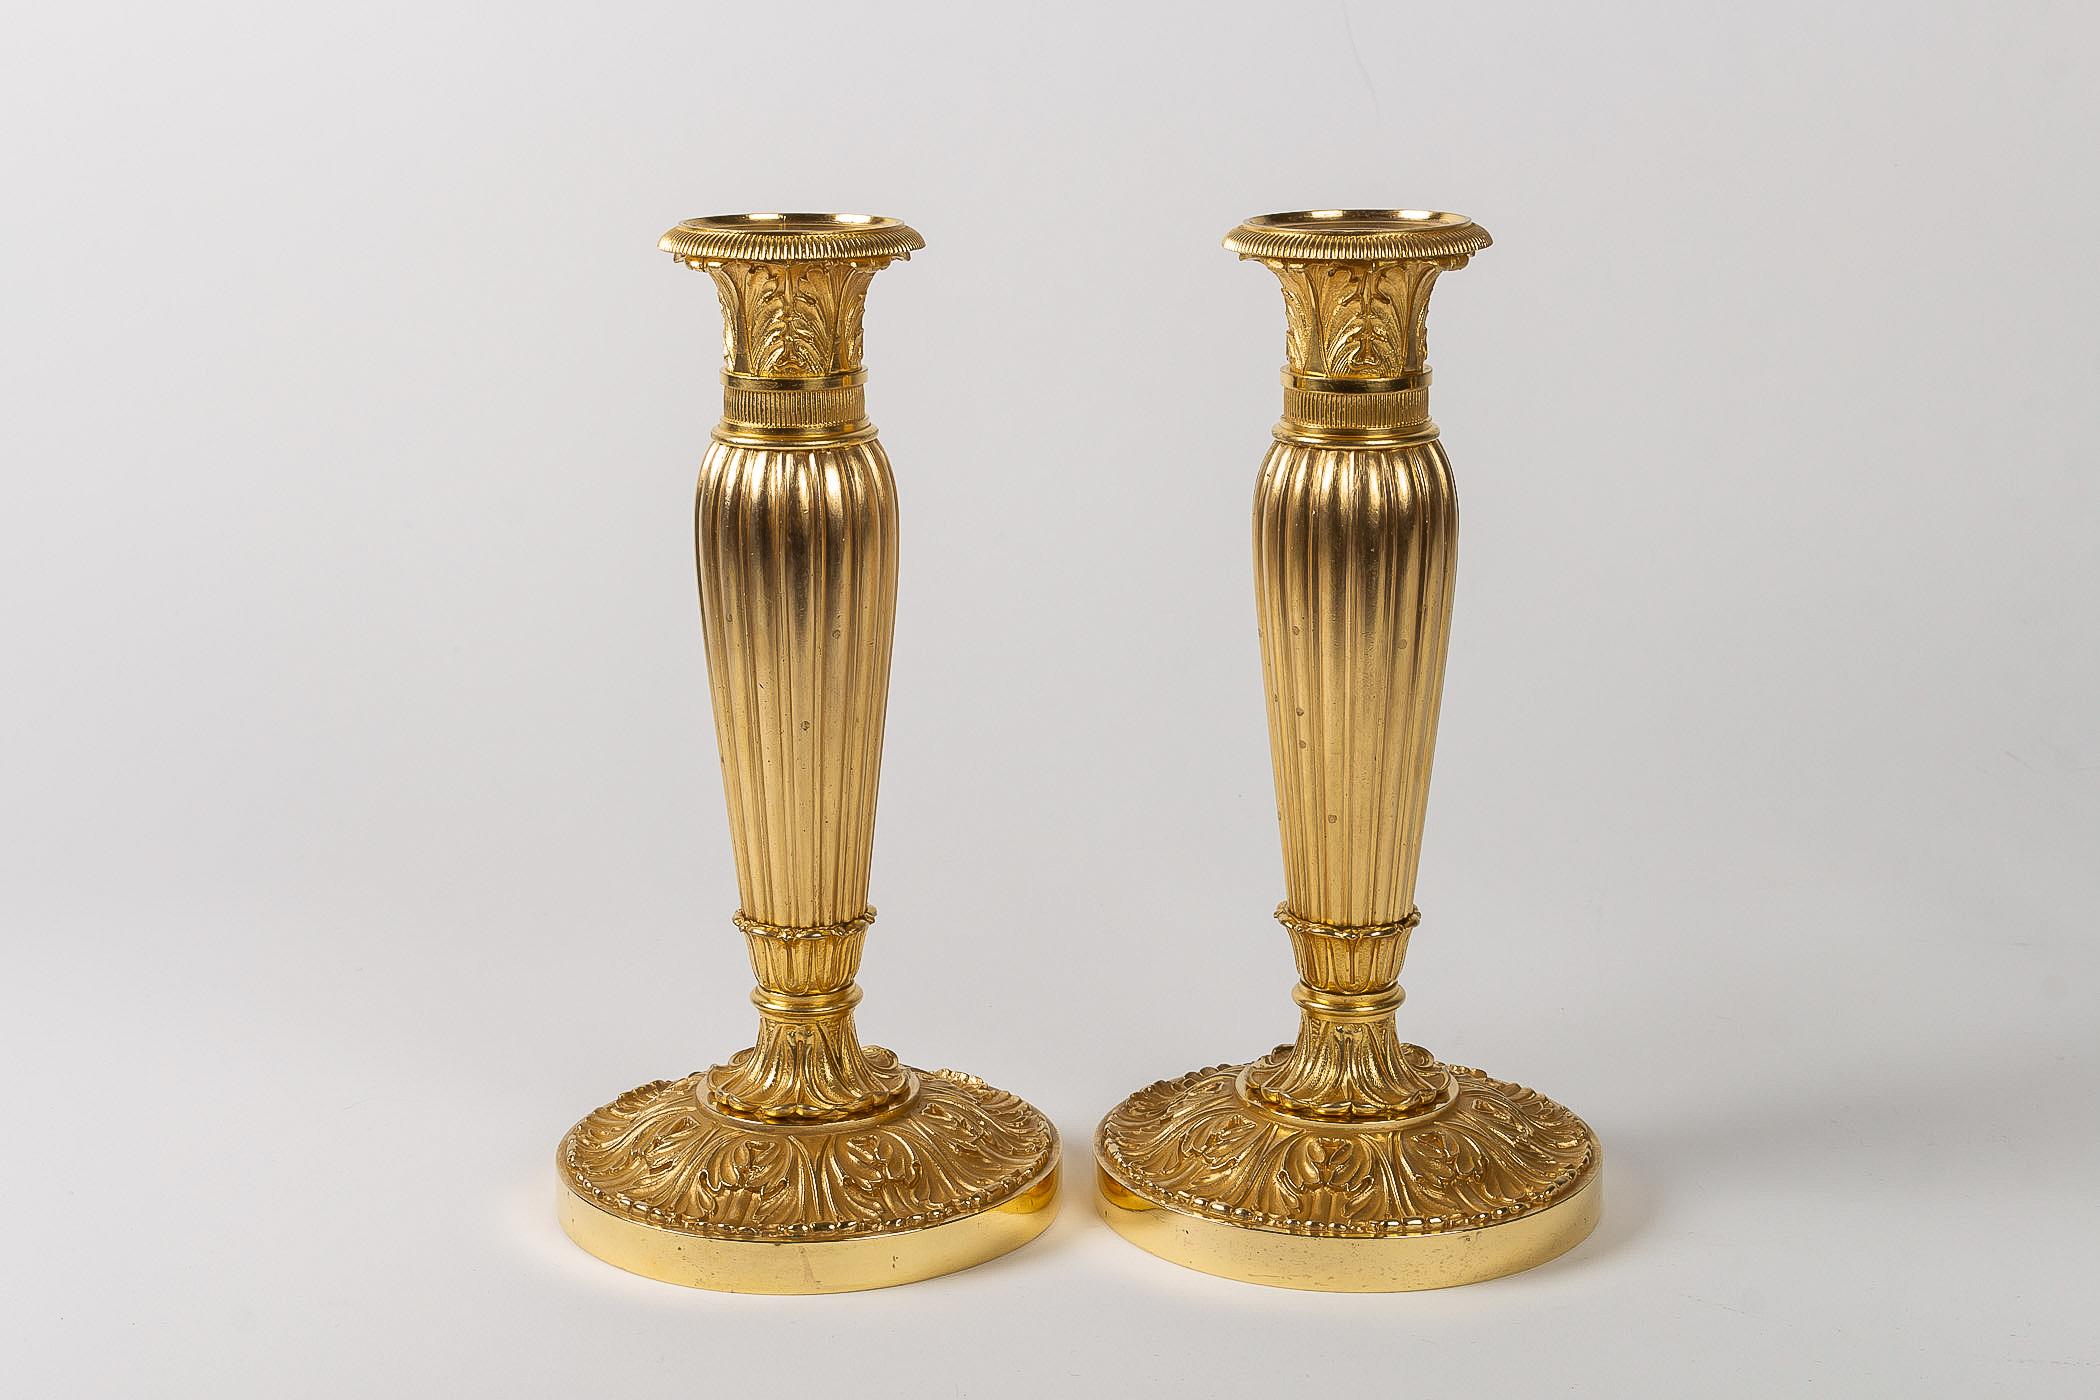 19th Century French Empire Period, Pair of Chiseled Gilt-Bronze Candlesticks, circa 1805-1810